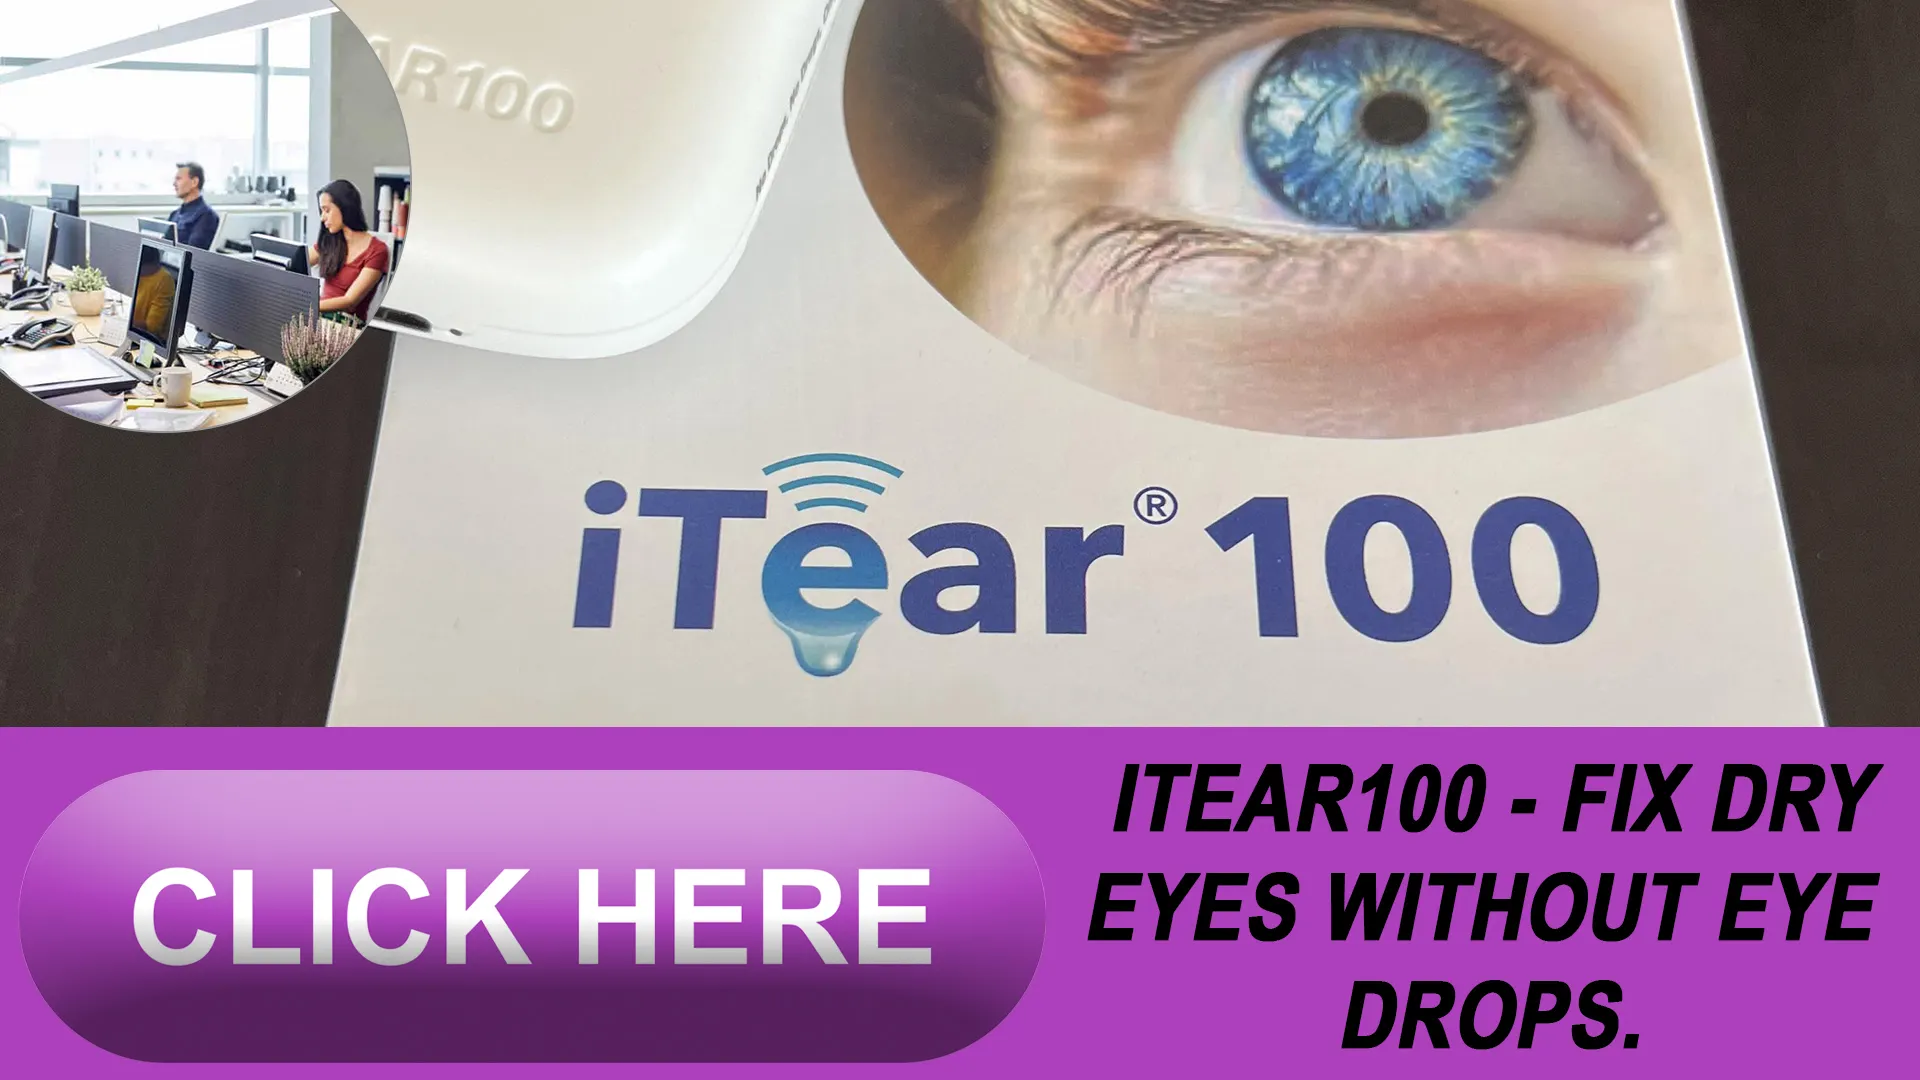 The iTEAR100 Device: A Drug-Free Solution